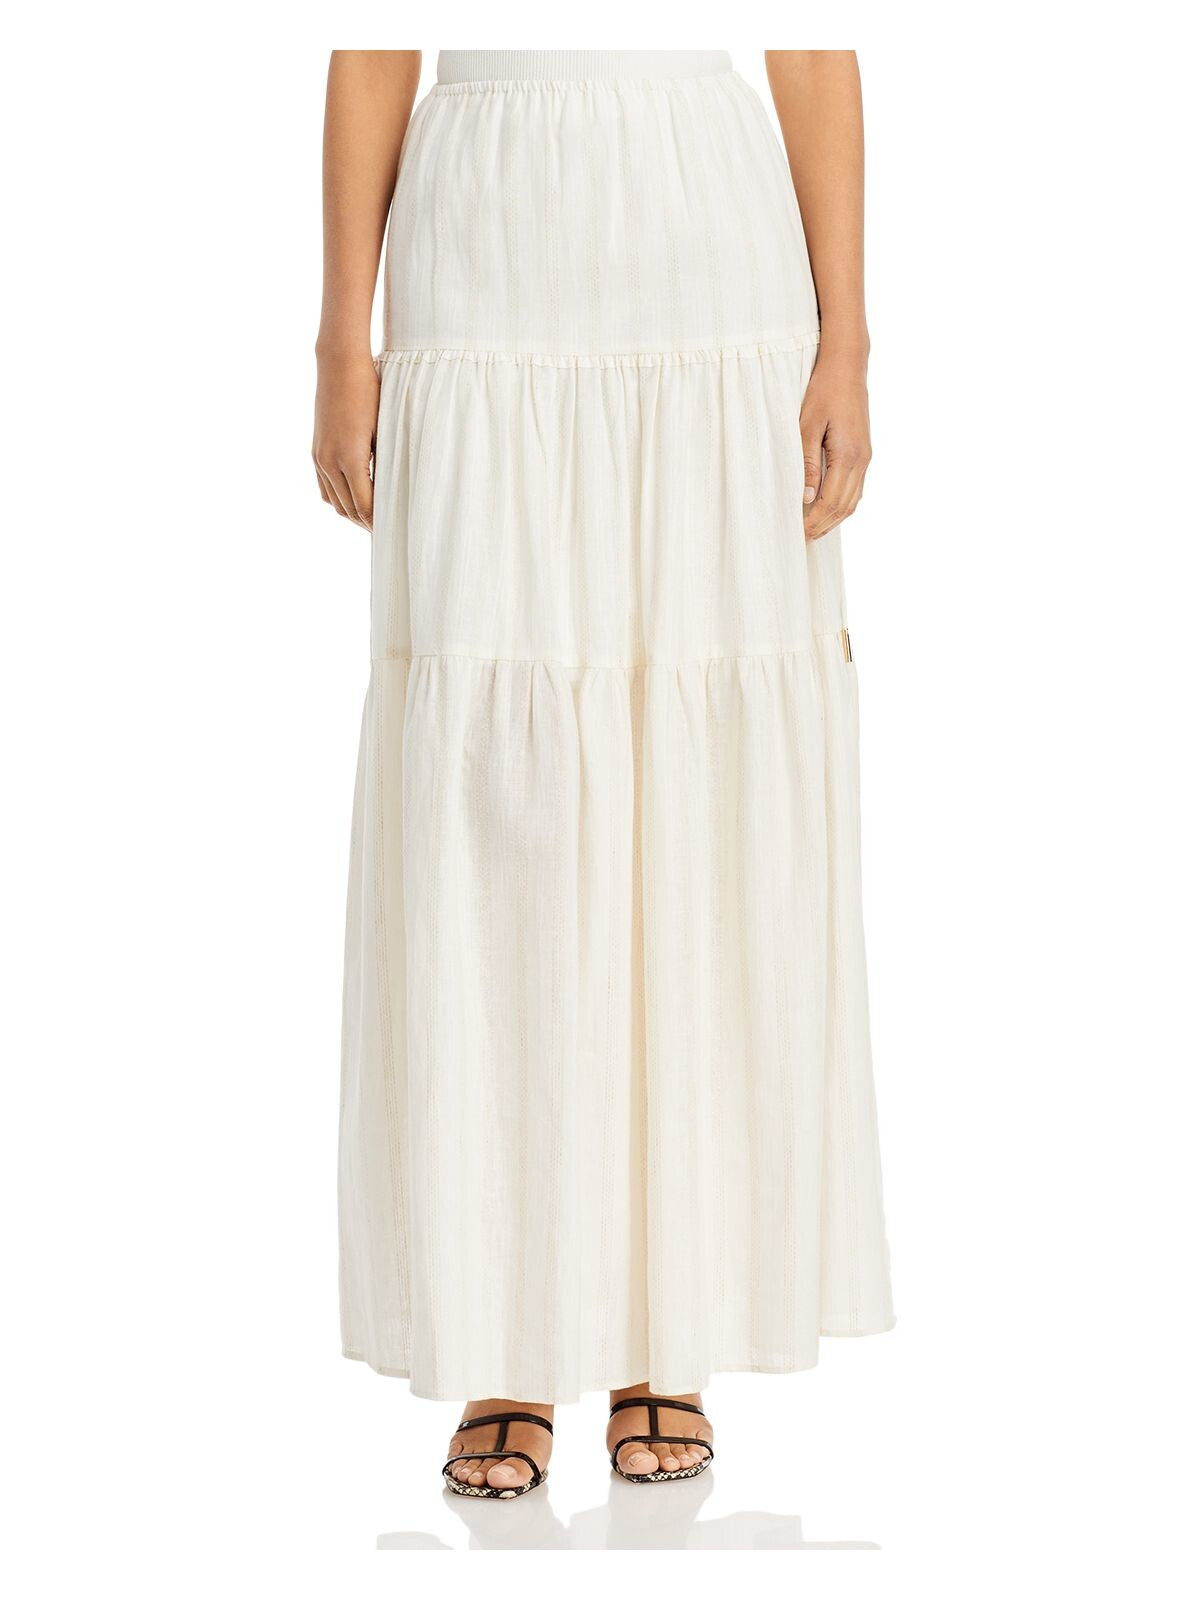 SIGNIFICANT OTHER Womens Ivory Tie Maxi Skirt 8